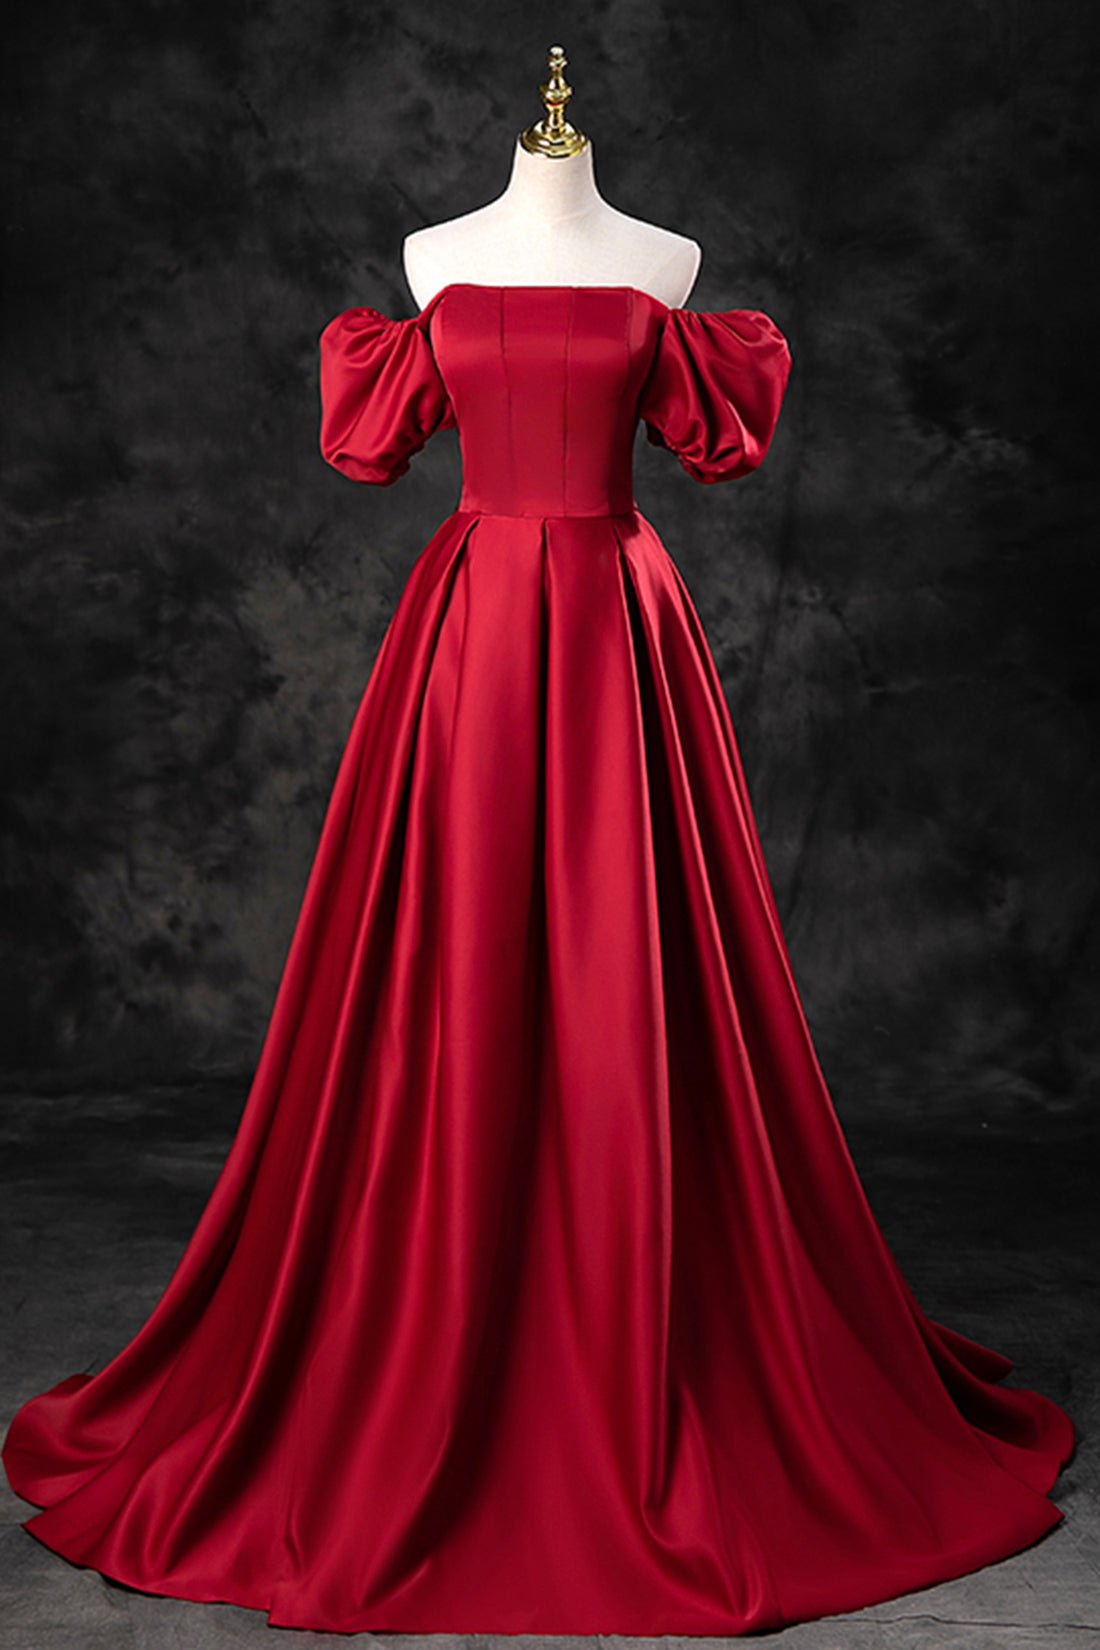 Prom Dresses Laces, Burgundy Satin Long A-Line Prom Dress, Off the Shoulder Evening Party Dress